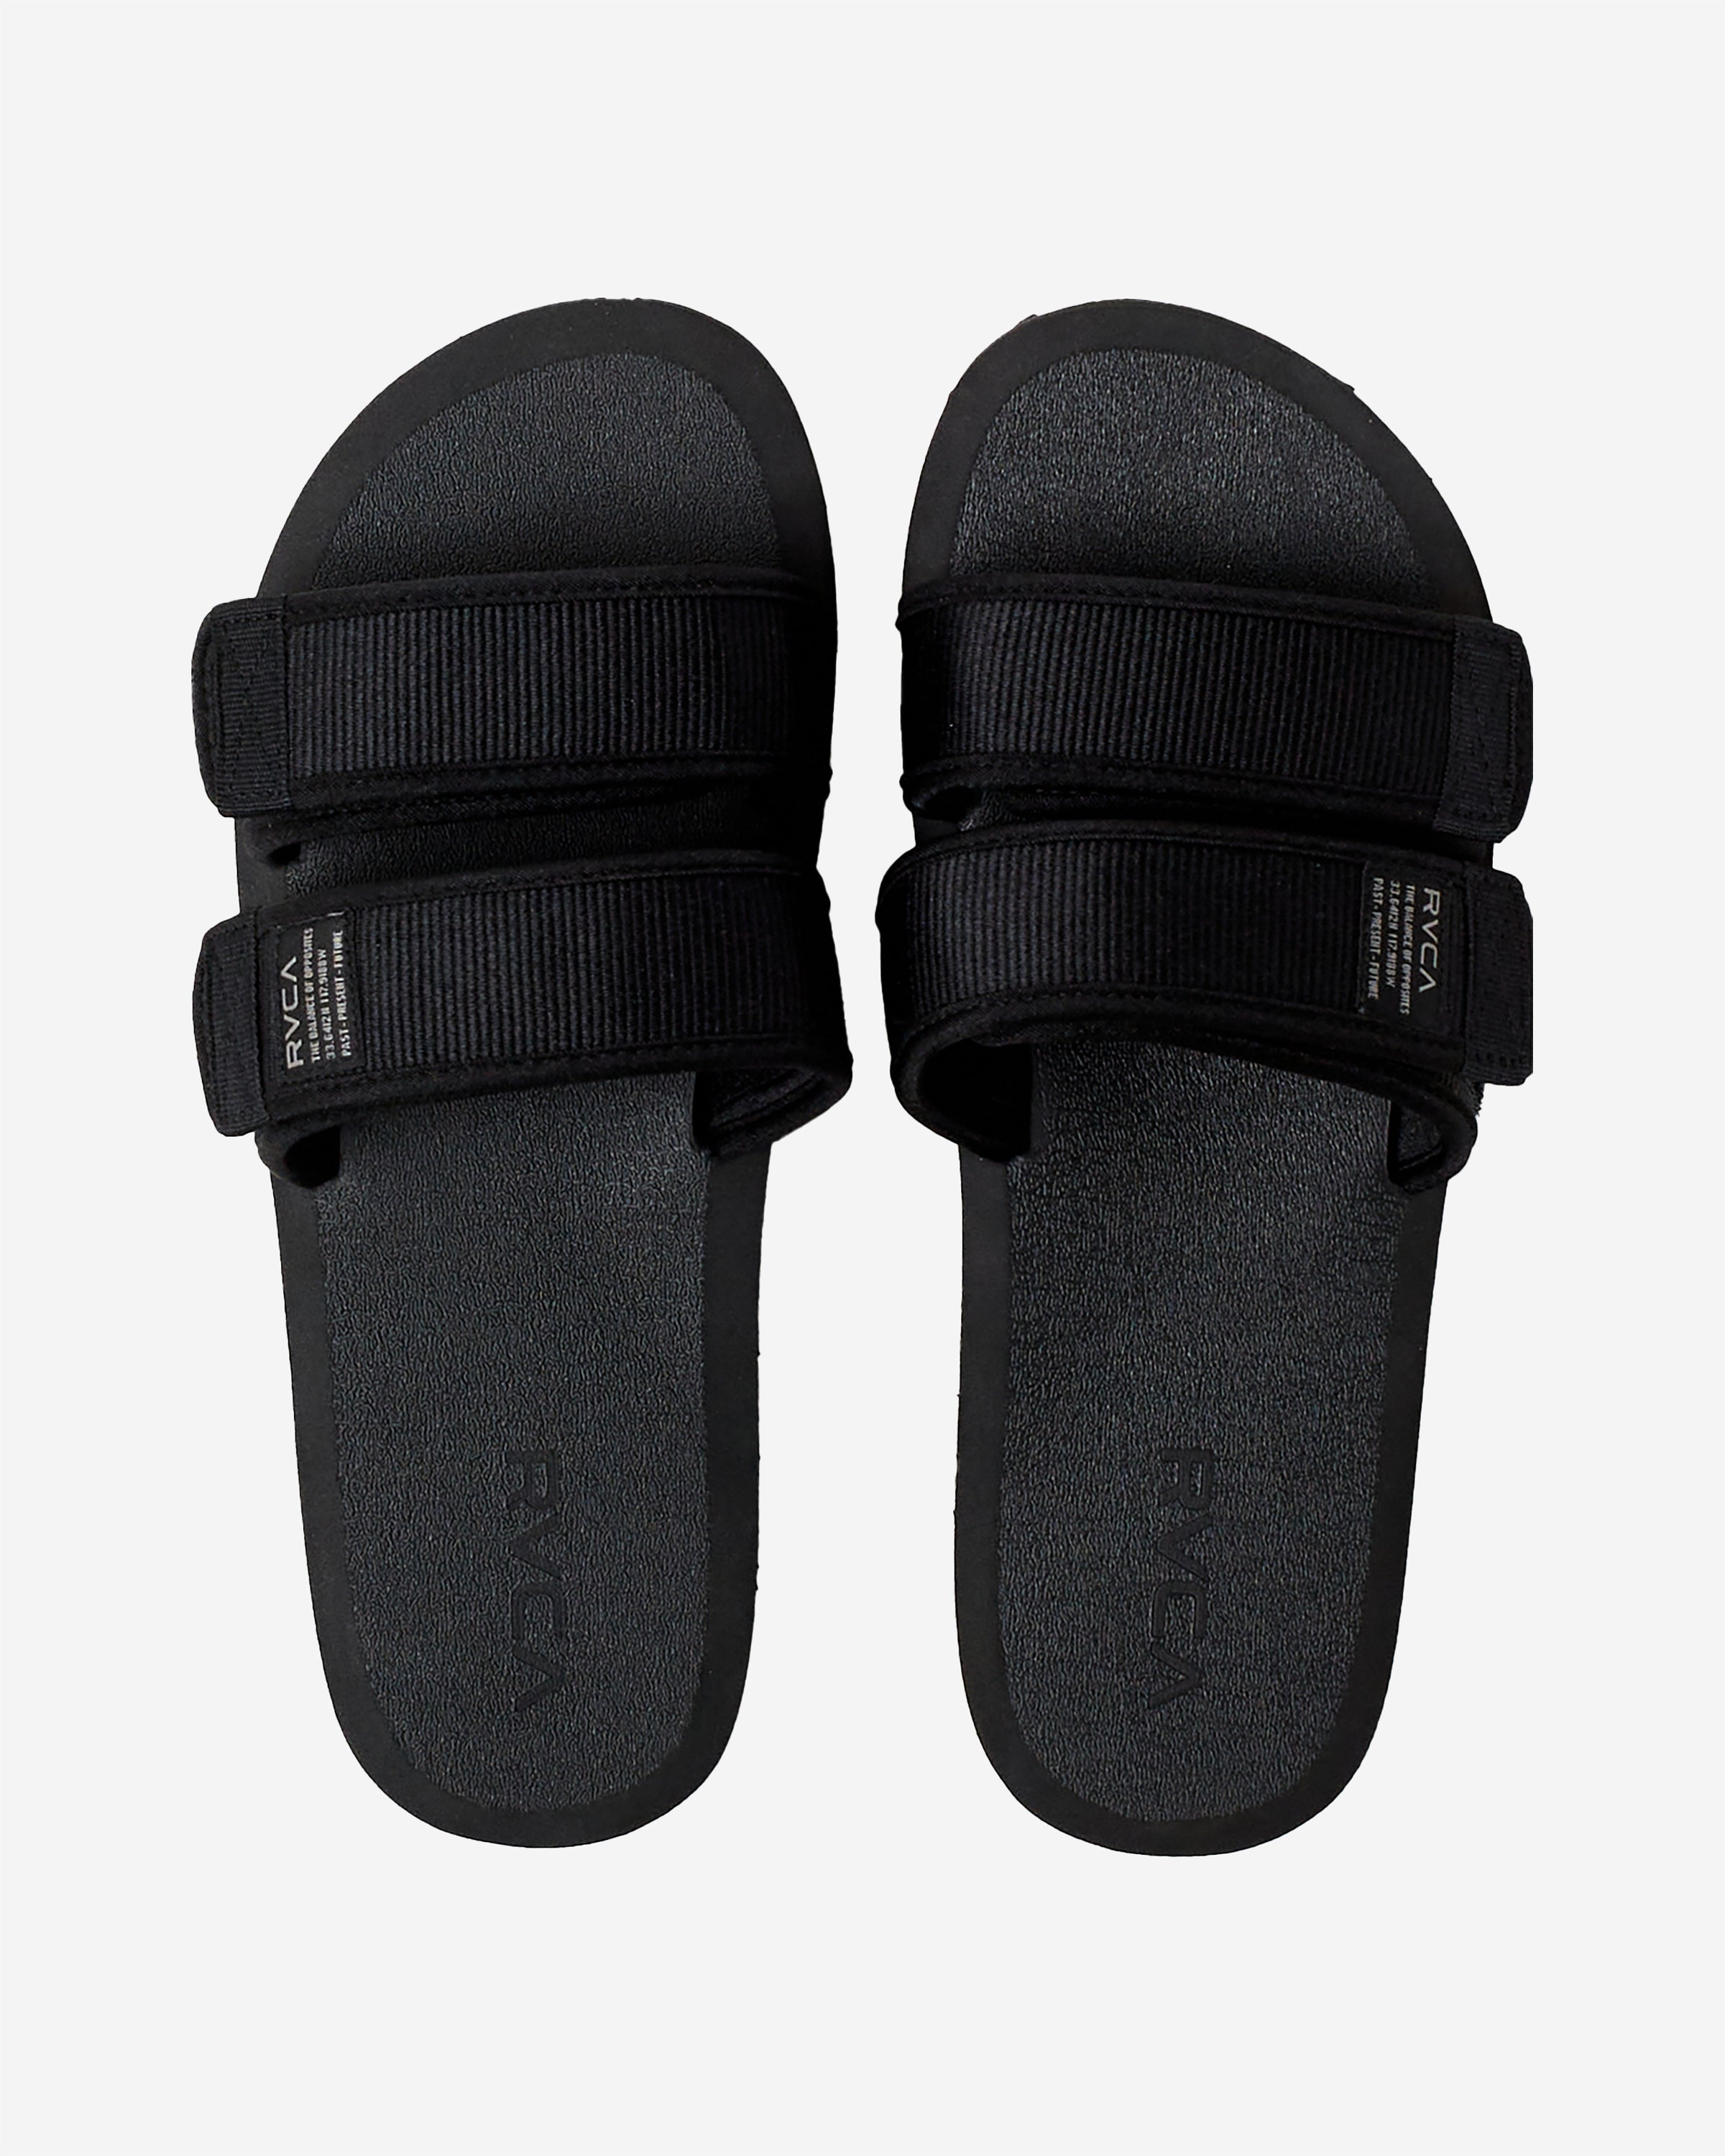 Upgrading a classic slide sandal with a double hook-and-look strap design, these Perennial Collection sandals feature a durable tread outsole for better traction.